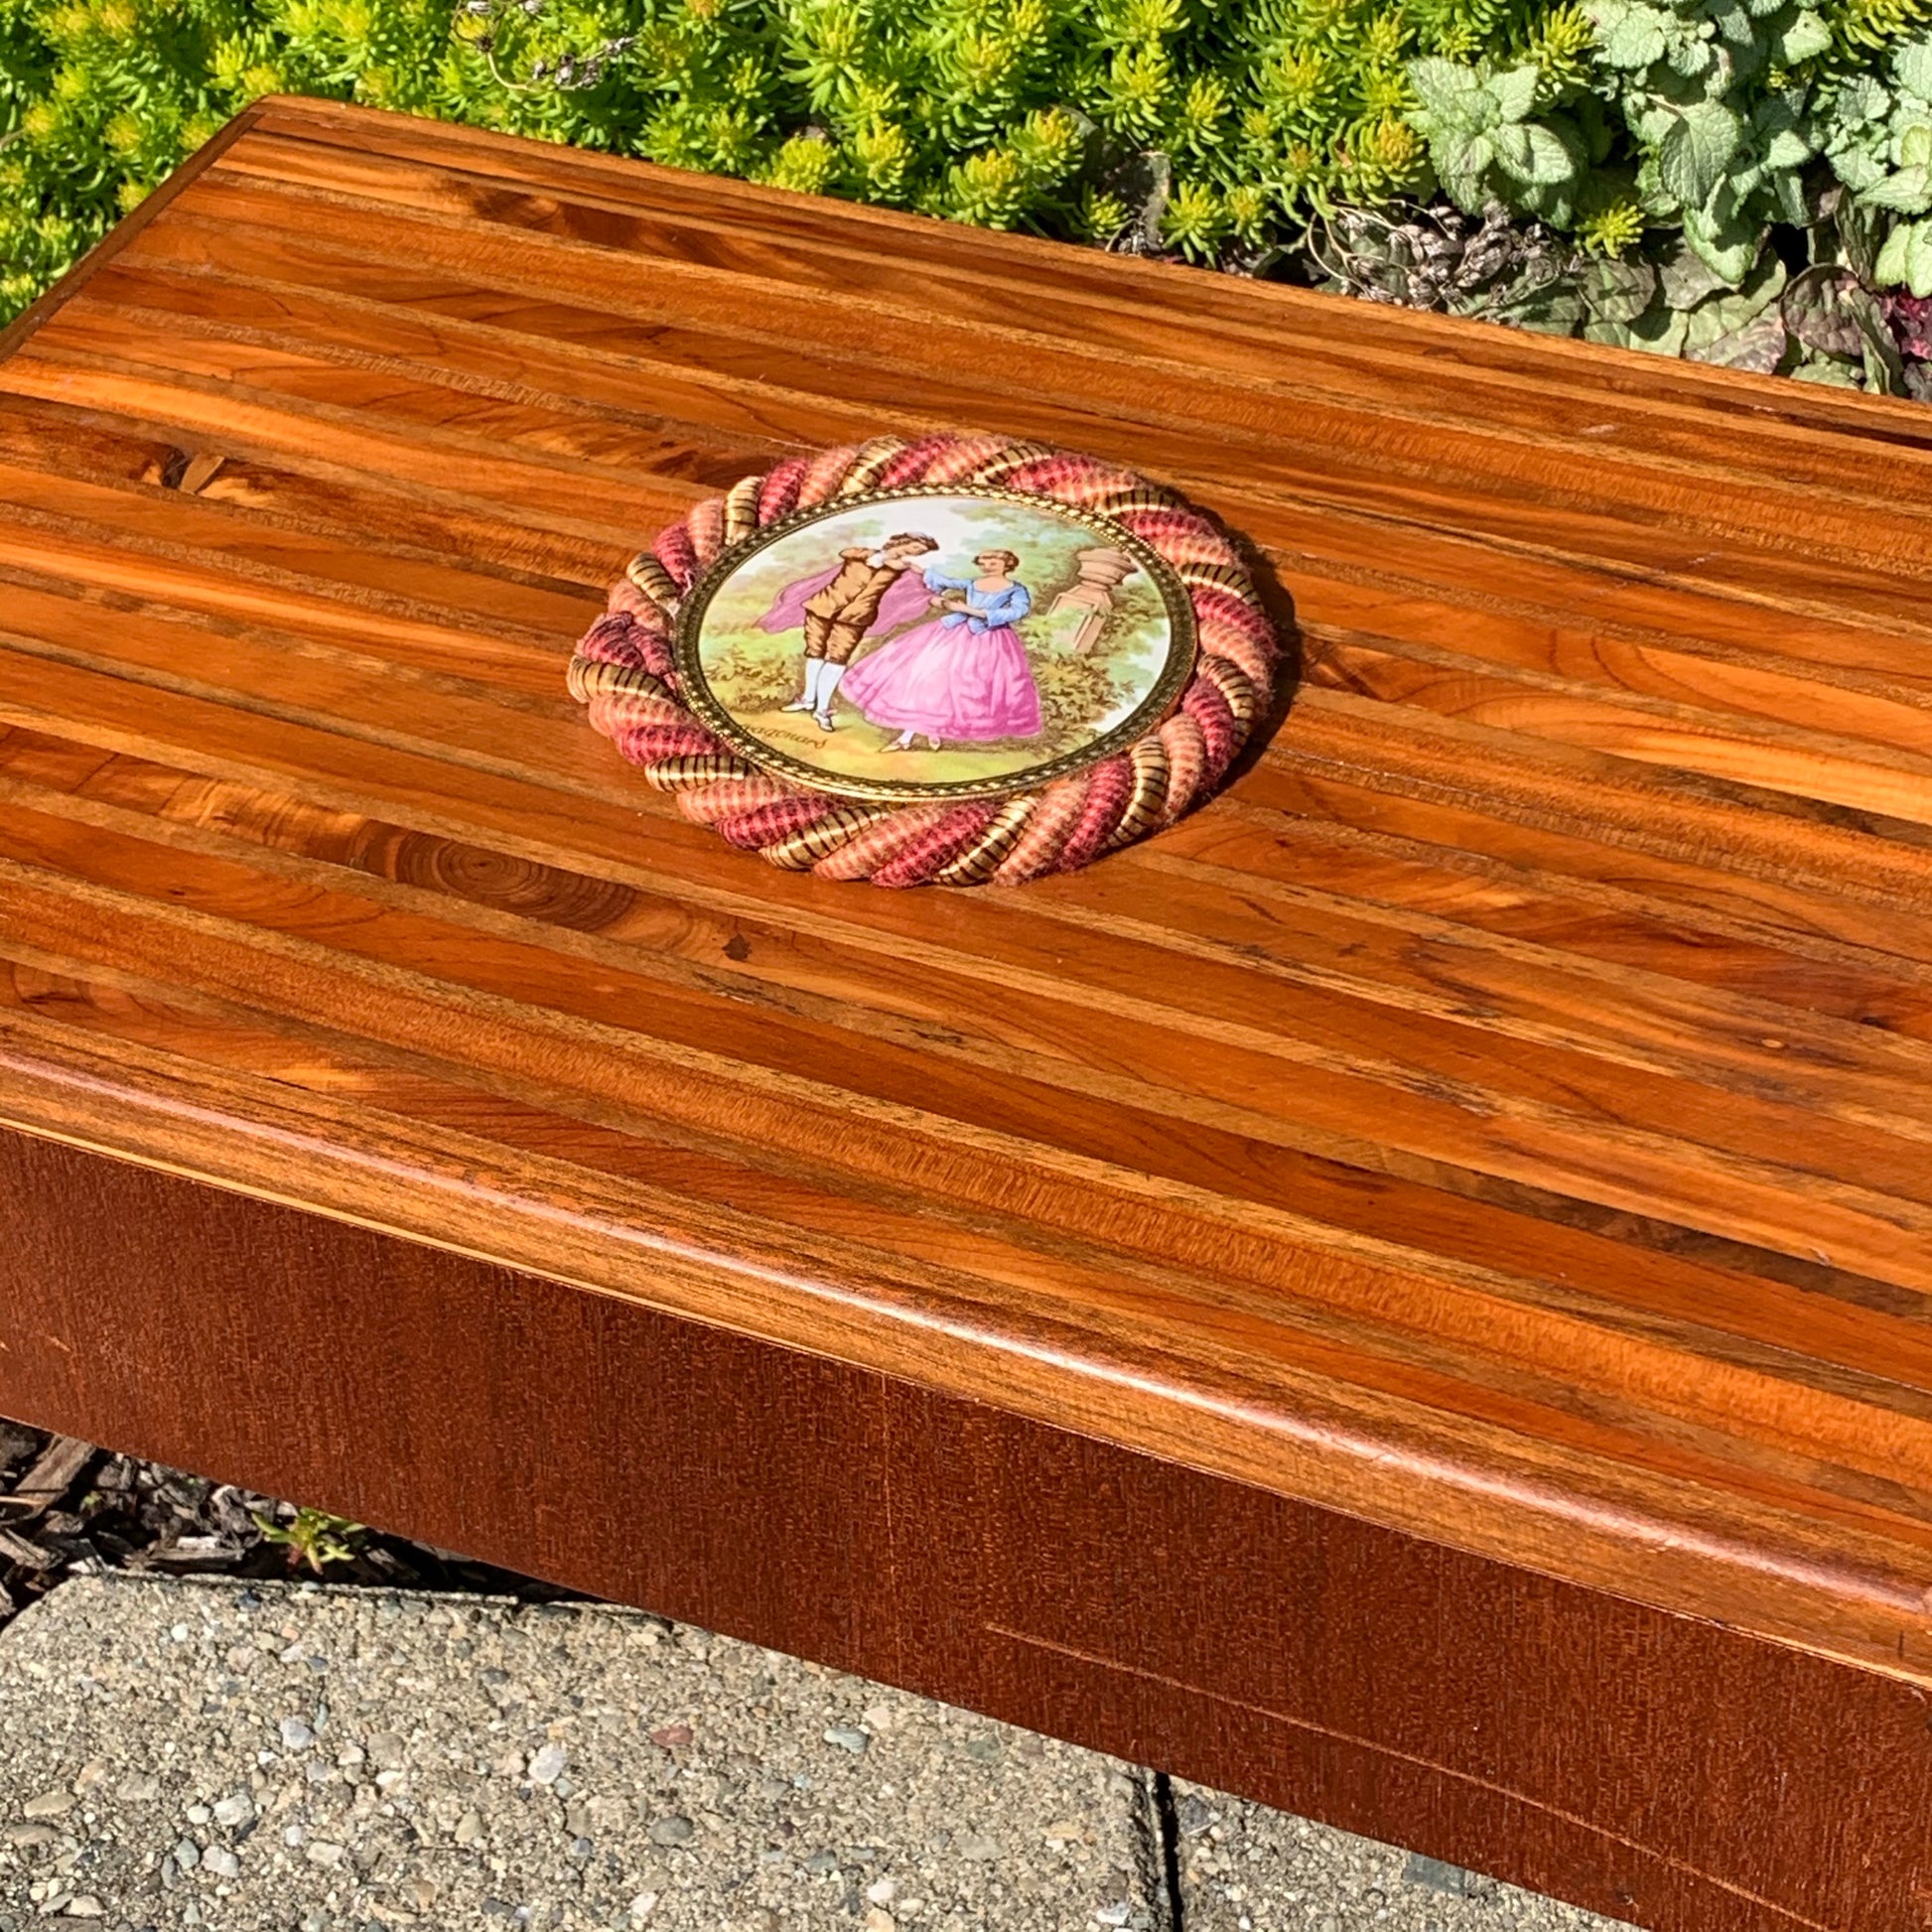 Lady Slippers Romantic Wooden Jewelry Box